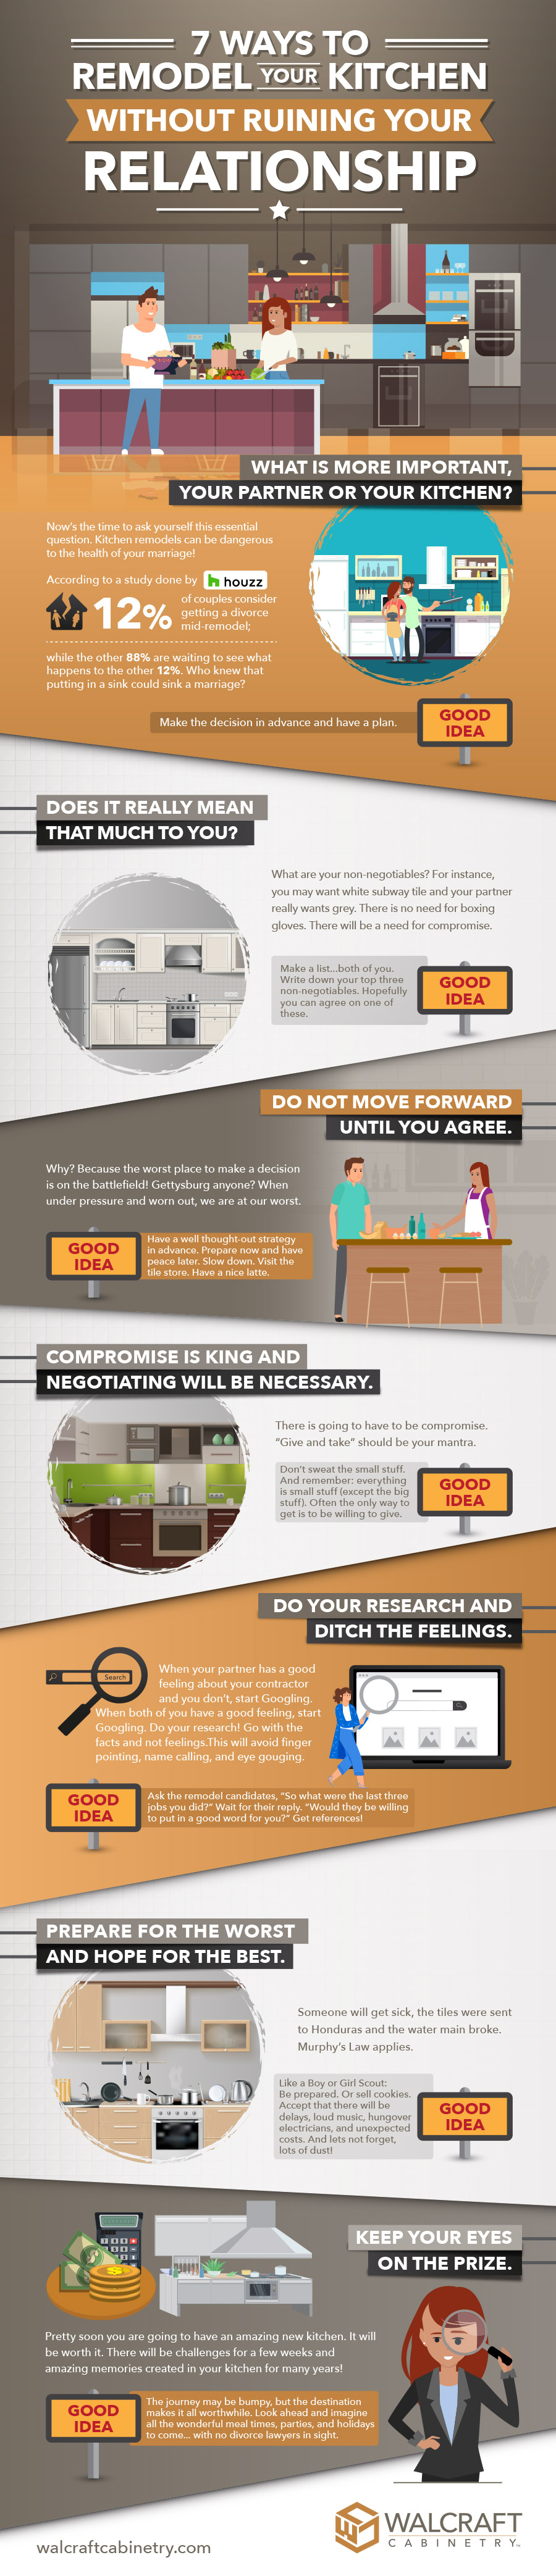 7 Ways to Remodel Your Kitchen Without Ruining Your Relationship — Infographic